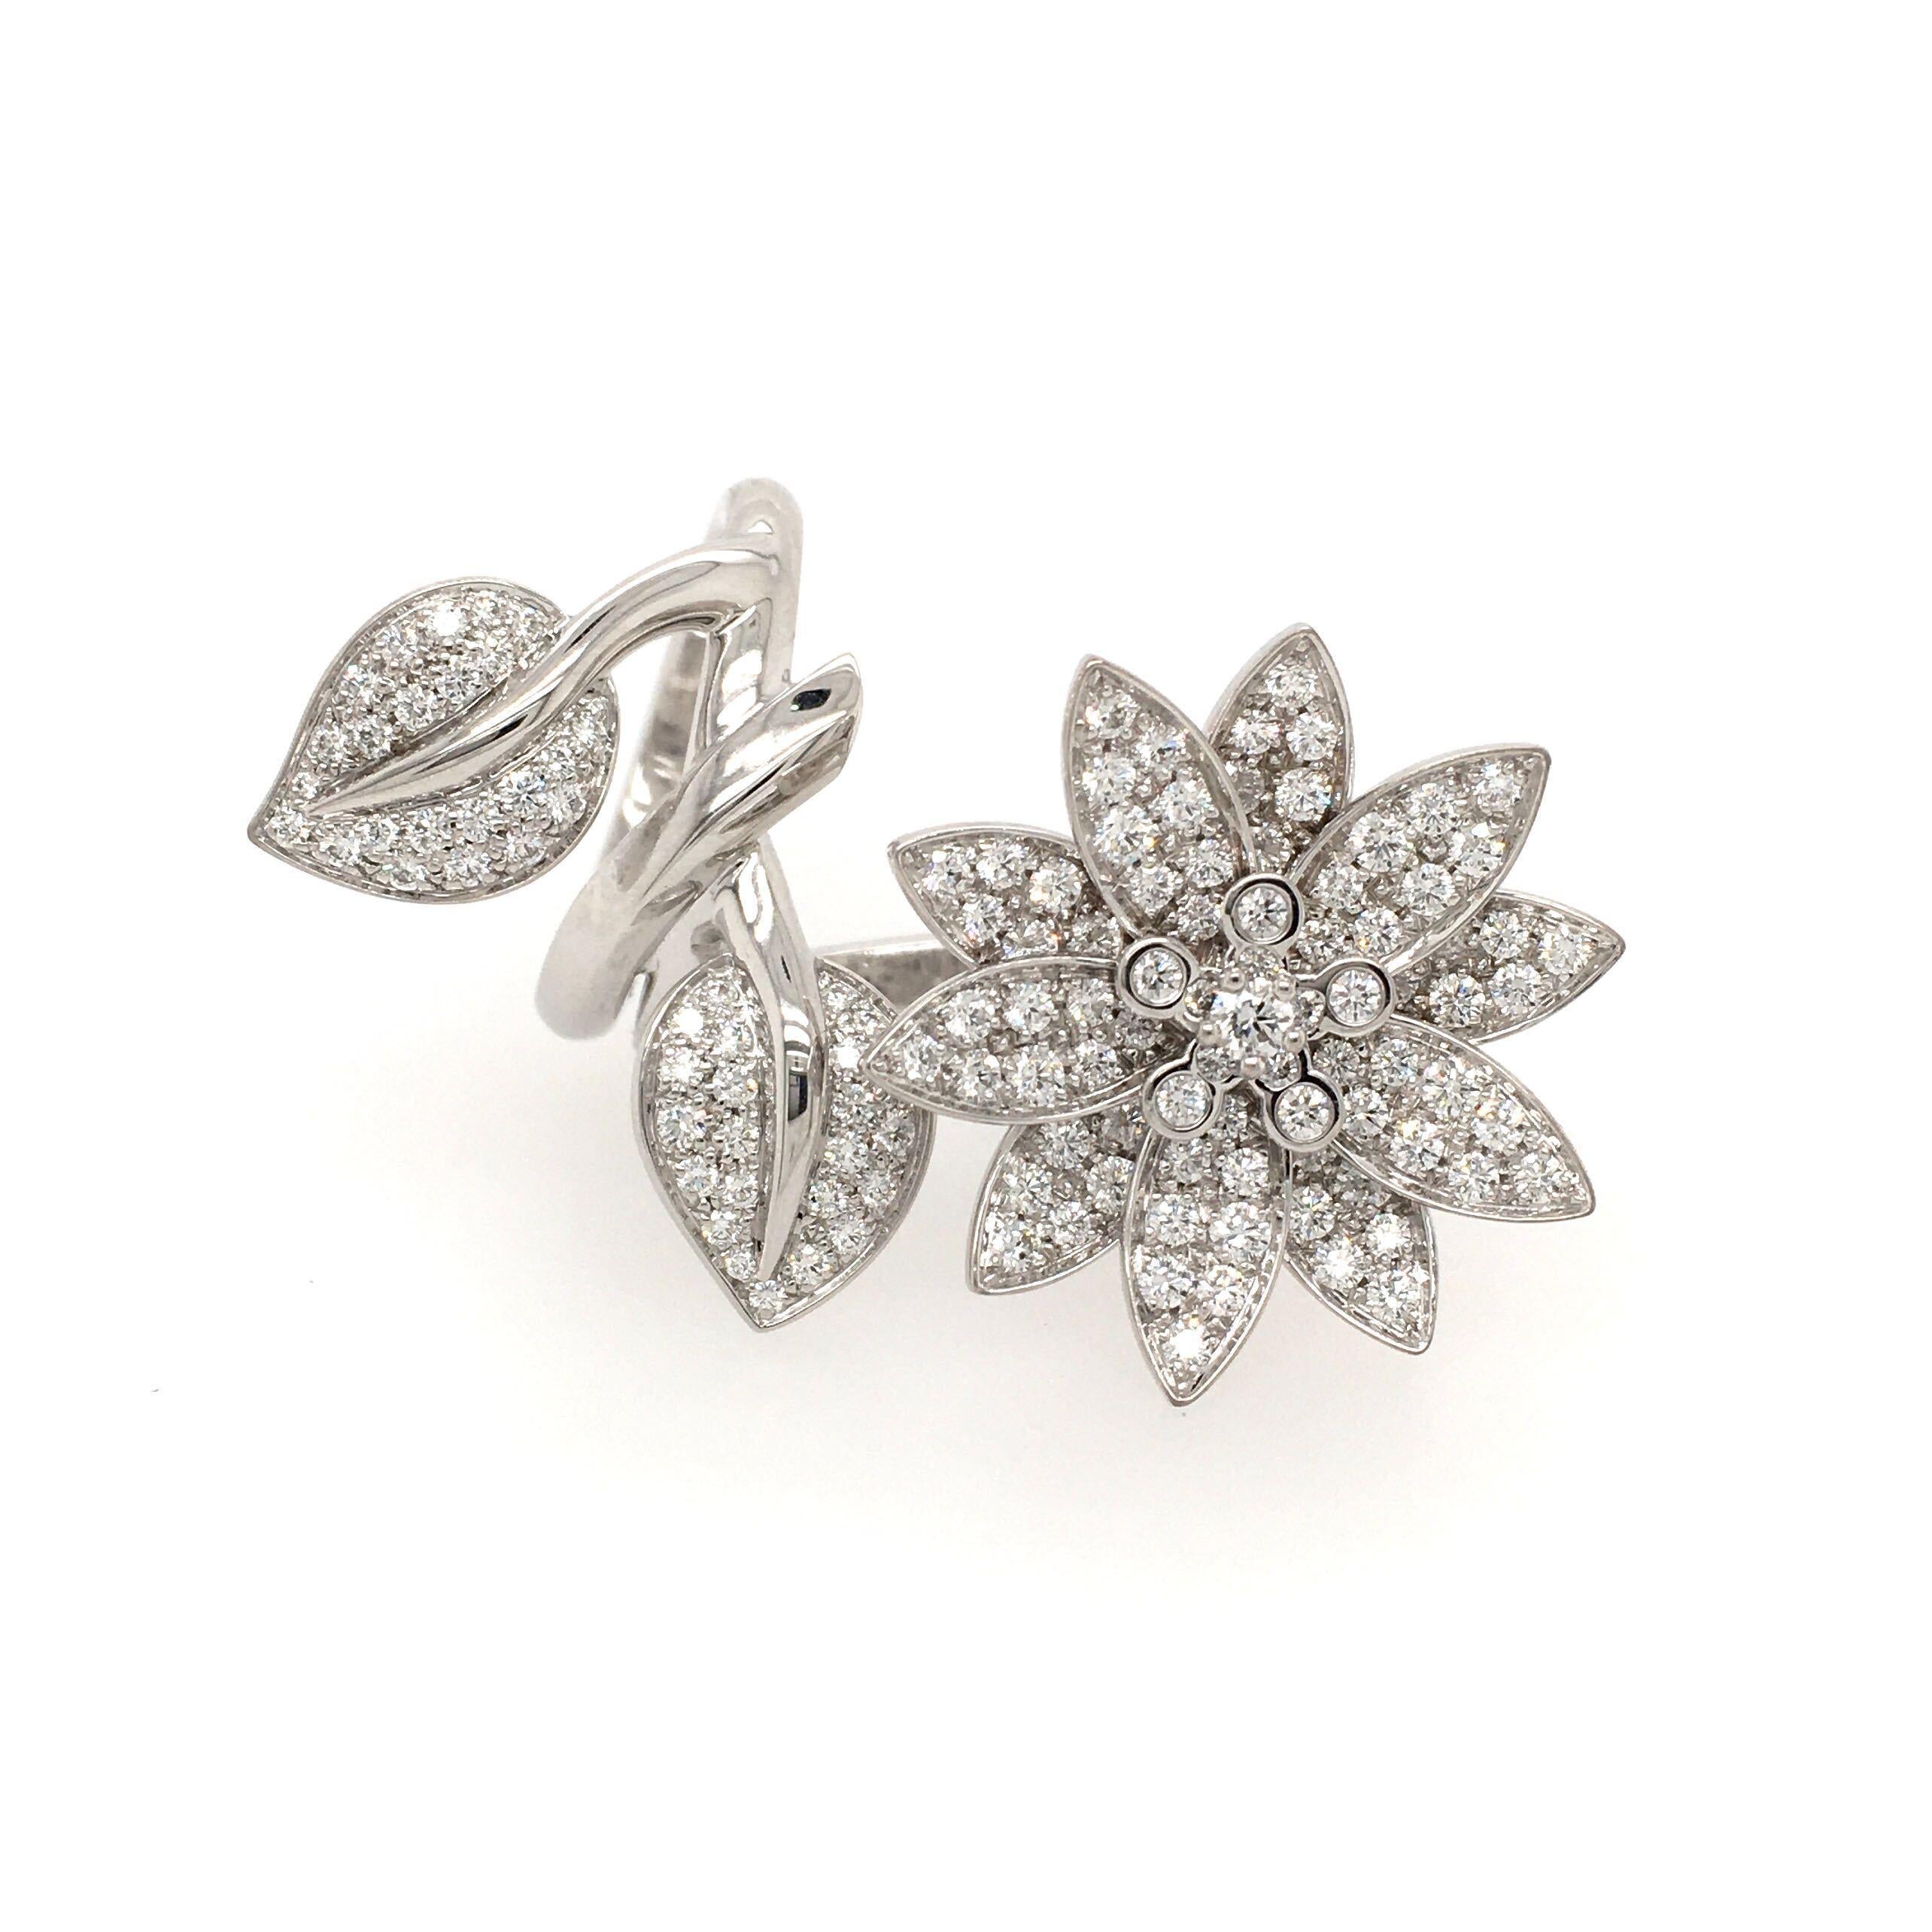 An 18 karat white gold and diamond Lotus Between The Finger ring. Van Cleef & Arpels. Designed as a pave set diamond flower blossom, accented by two pave set diamond leaves, to a sculpted 18k white gold vine forming the hinged double hoop. Total